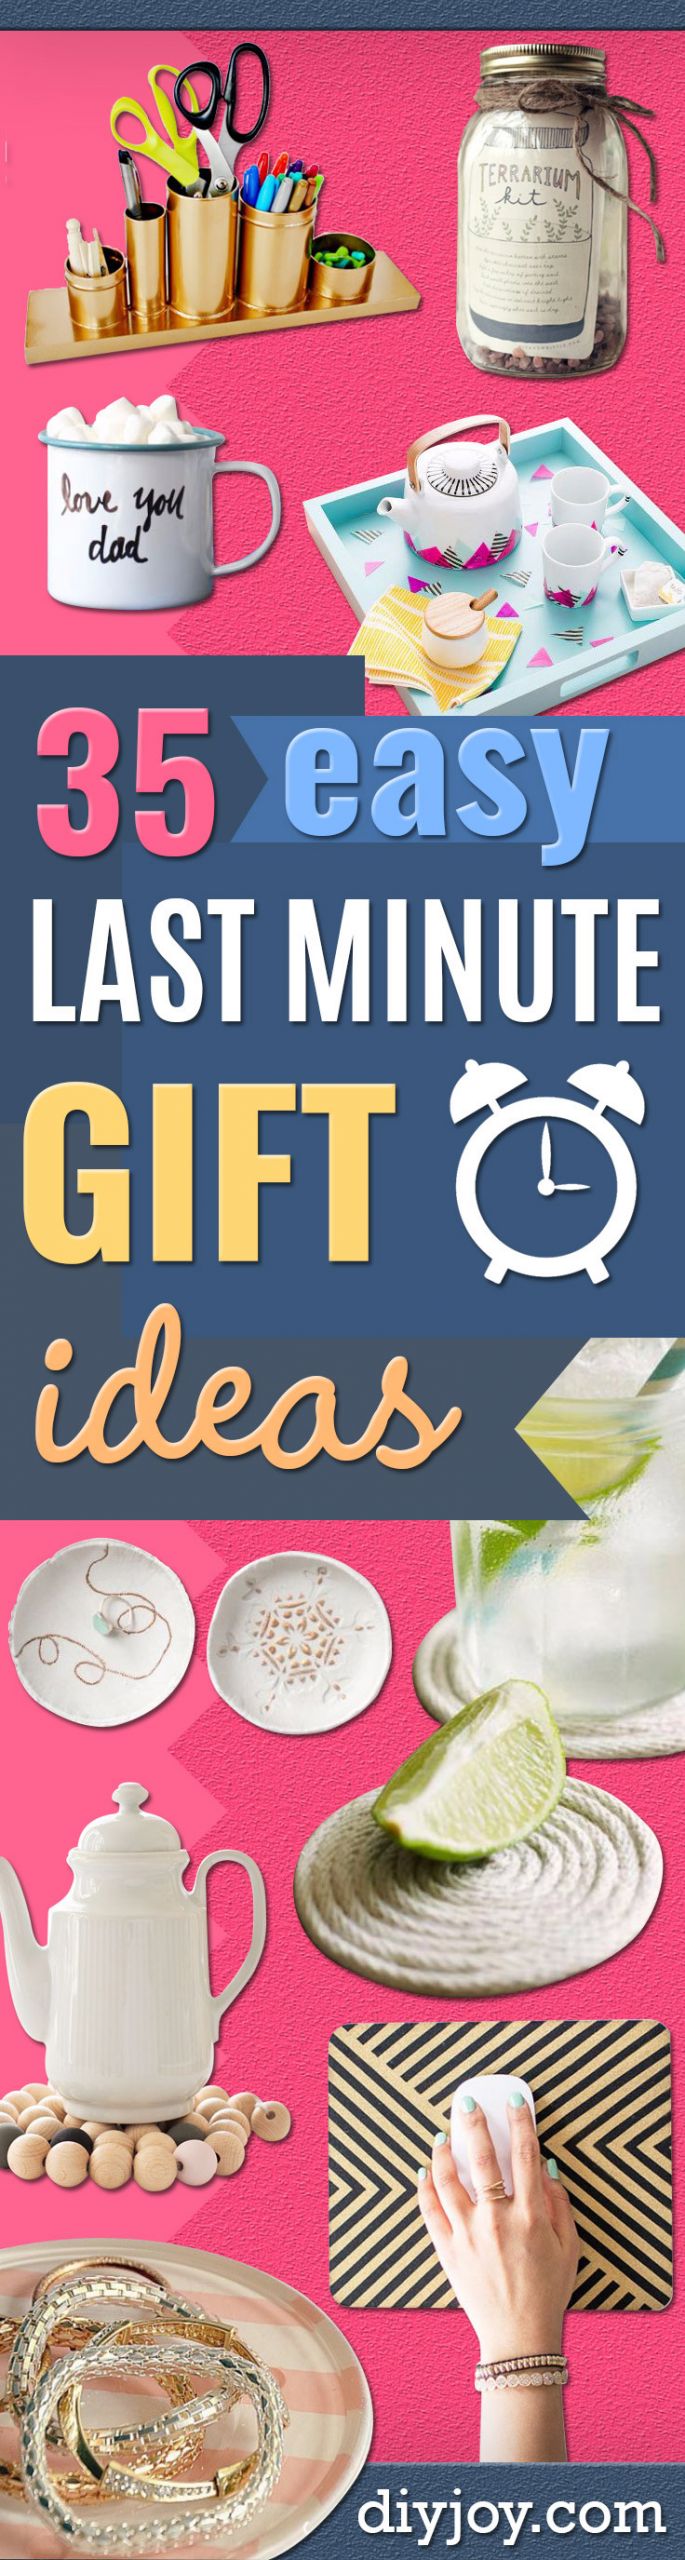 Quick DIY Christmas Gifts
 35 Last Minute DIY Gift Ideas